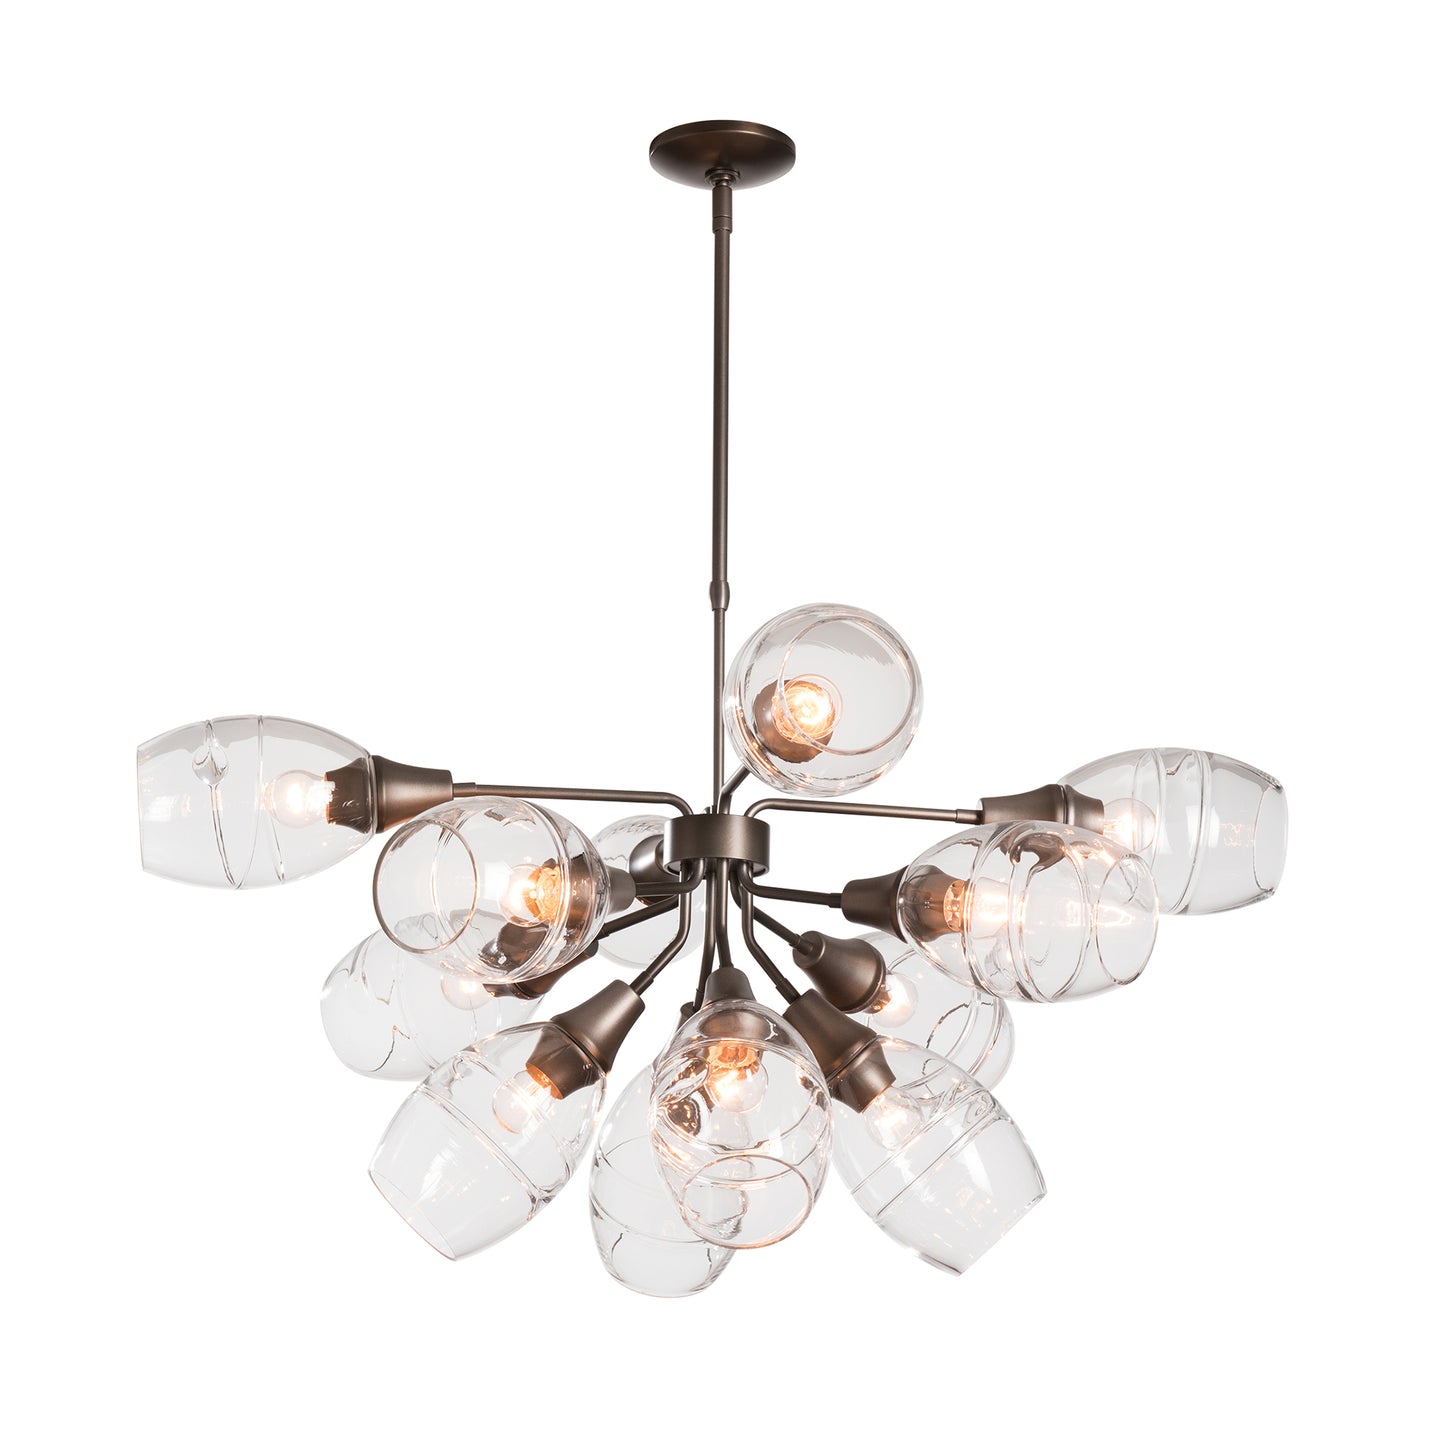 A Hubbardton Forge pendant chandelier adorned with a multitude of glass balls, designed for space travel enthusiasts.